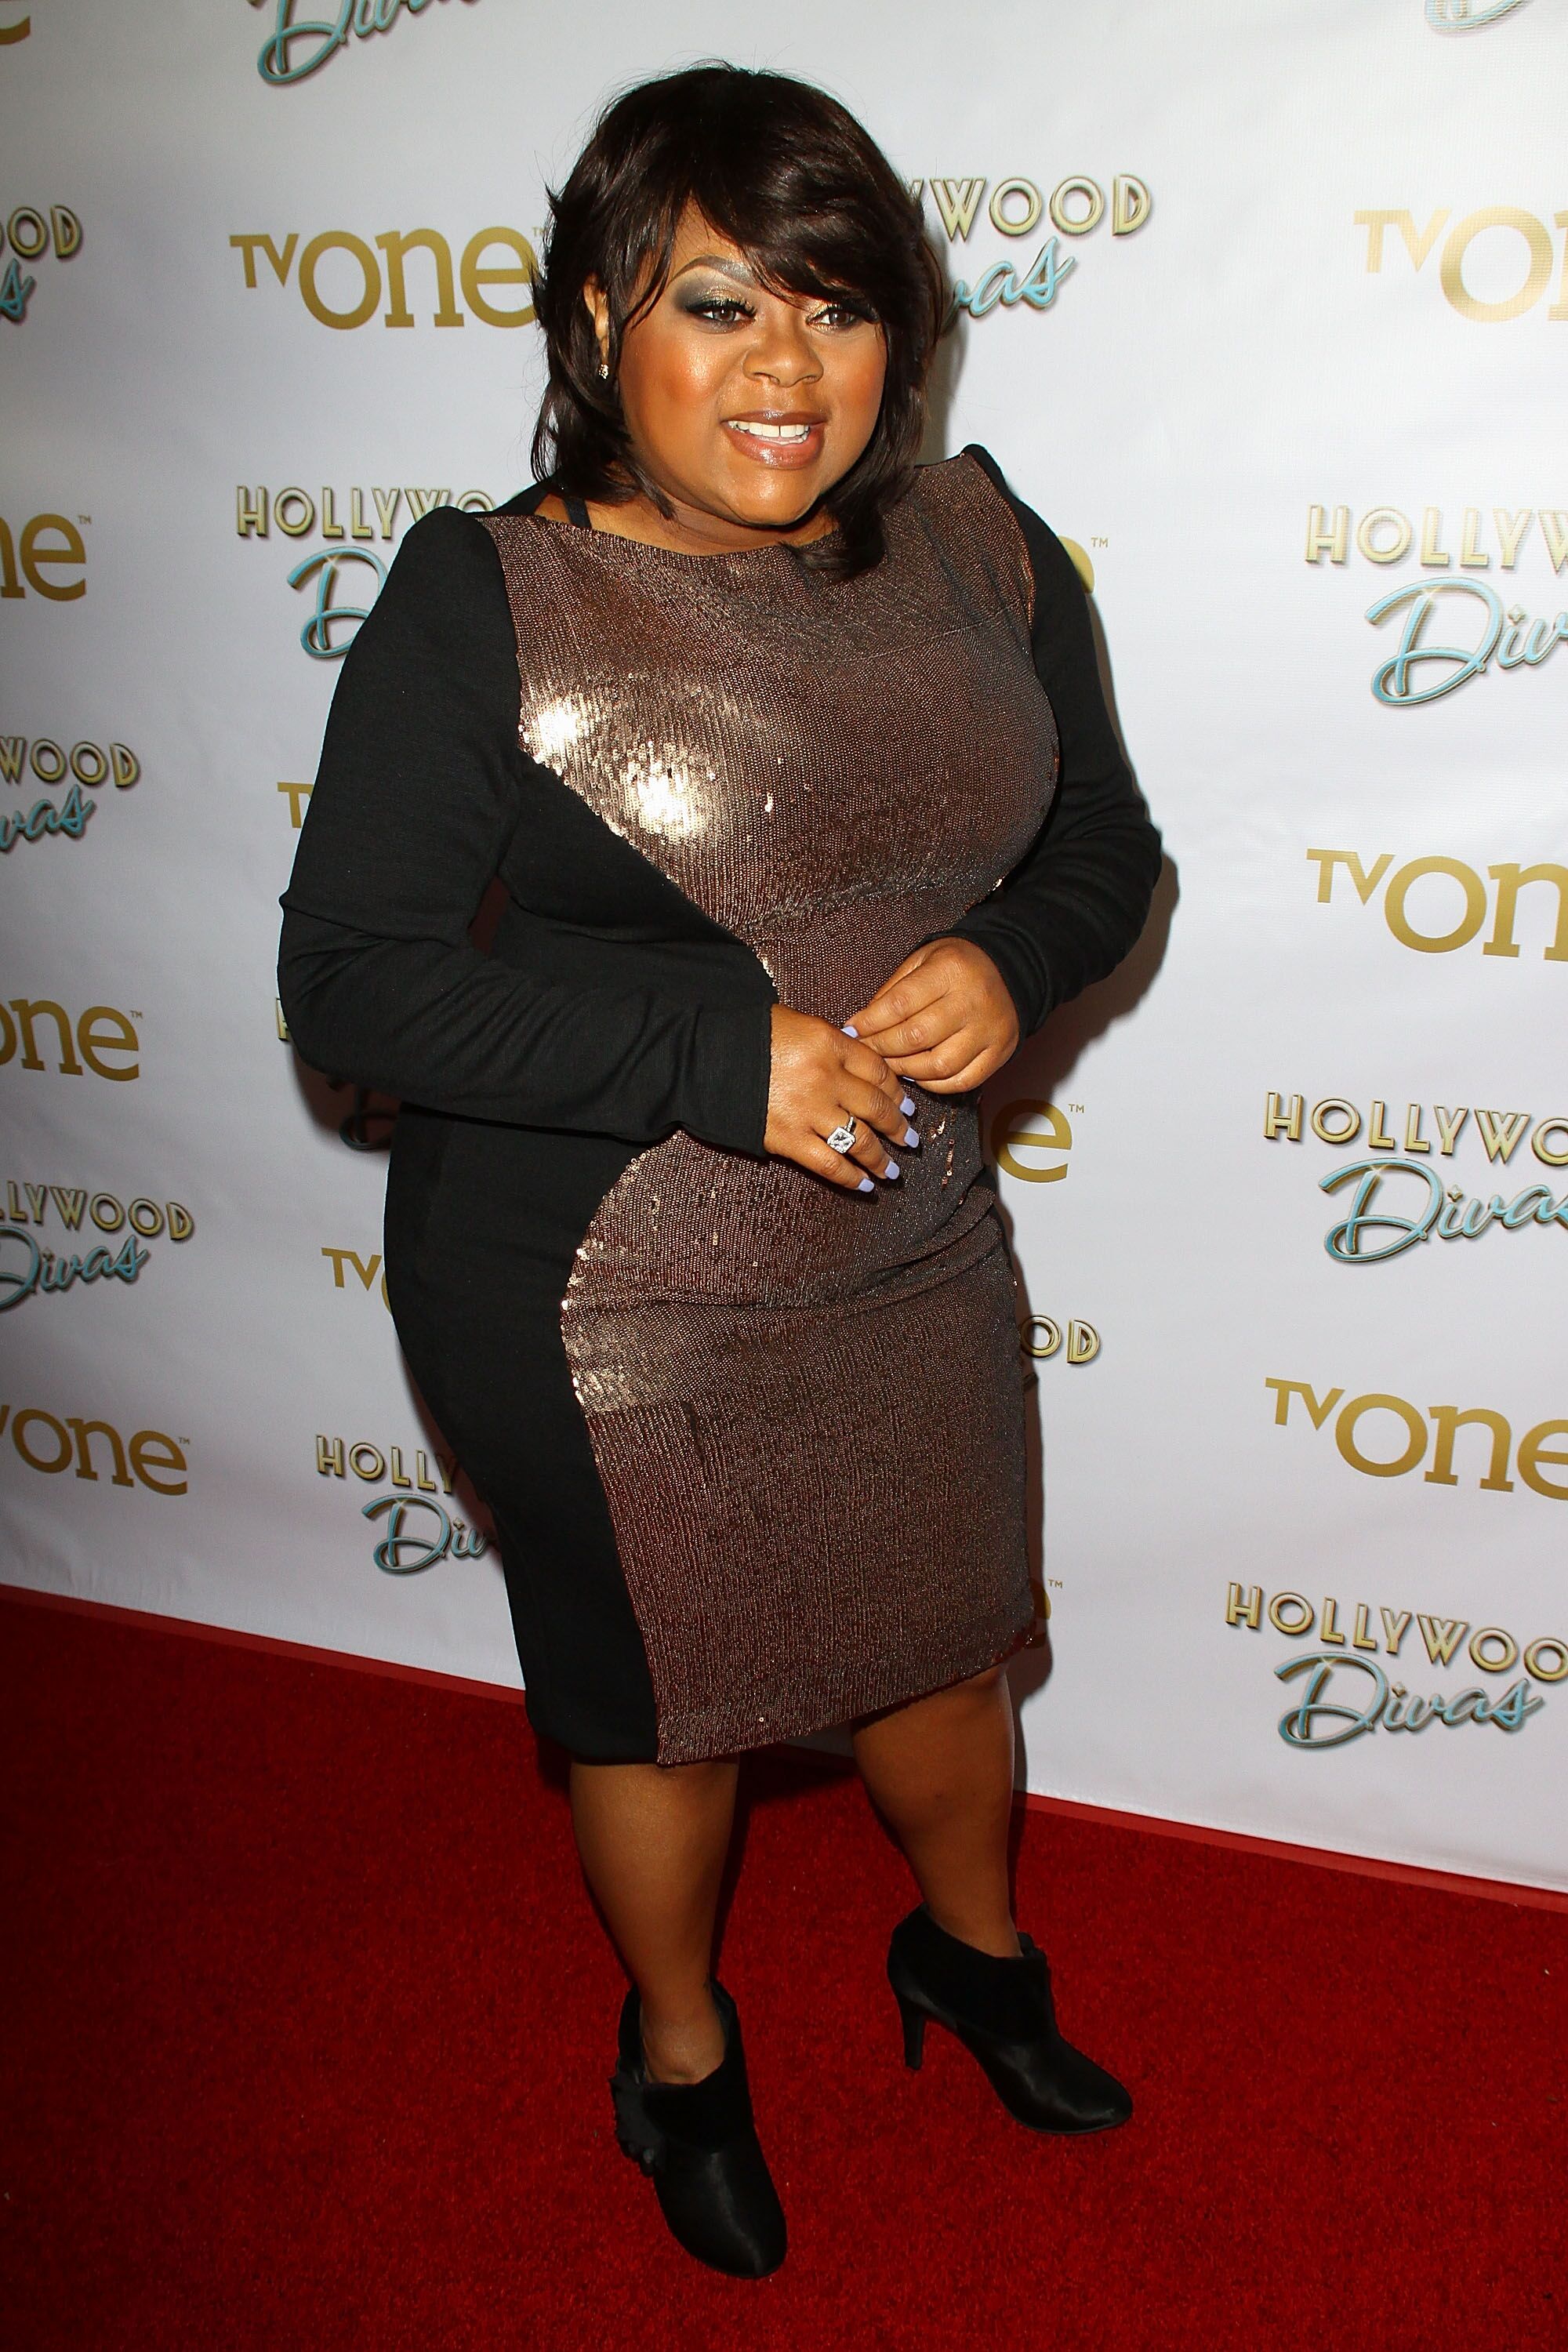 Actress Countess Vaughn attends the premiere party for TV One's 'Hollywood Divas' at OHM Nightclub | Photo: Getty Images